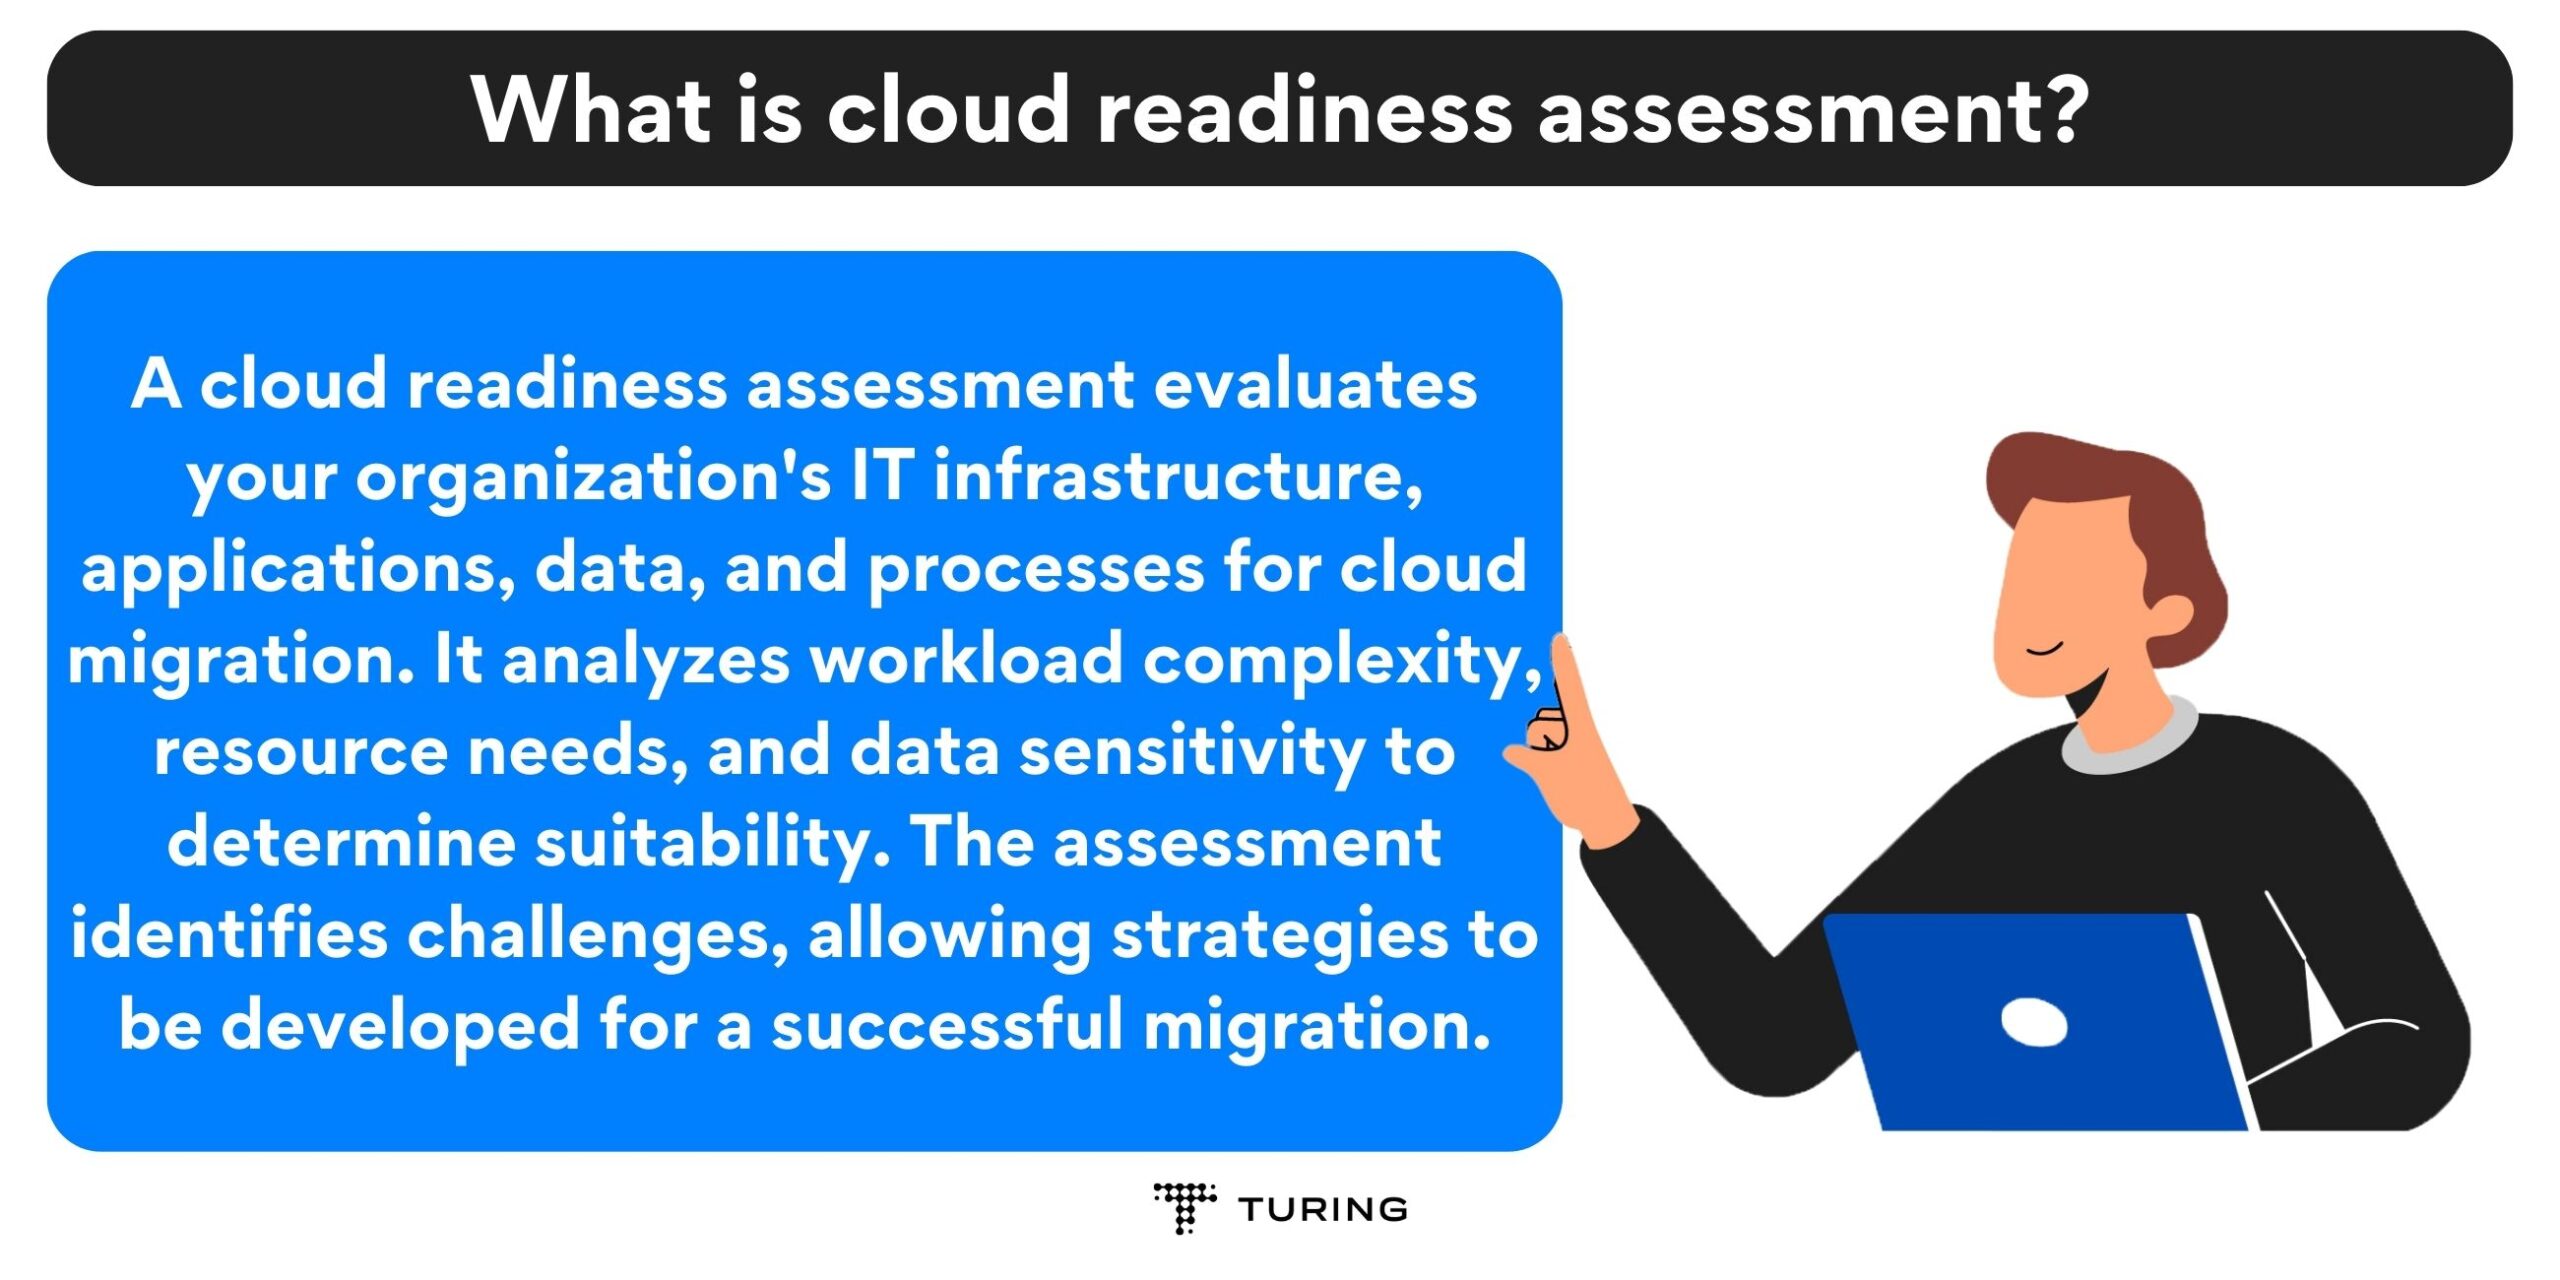 What is cloud readiness assessment